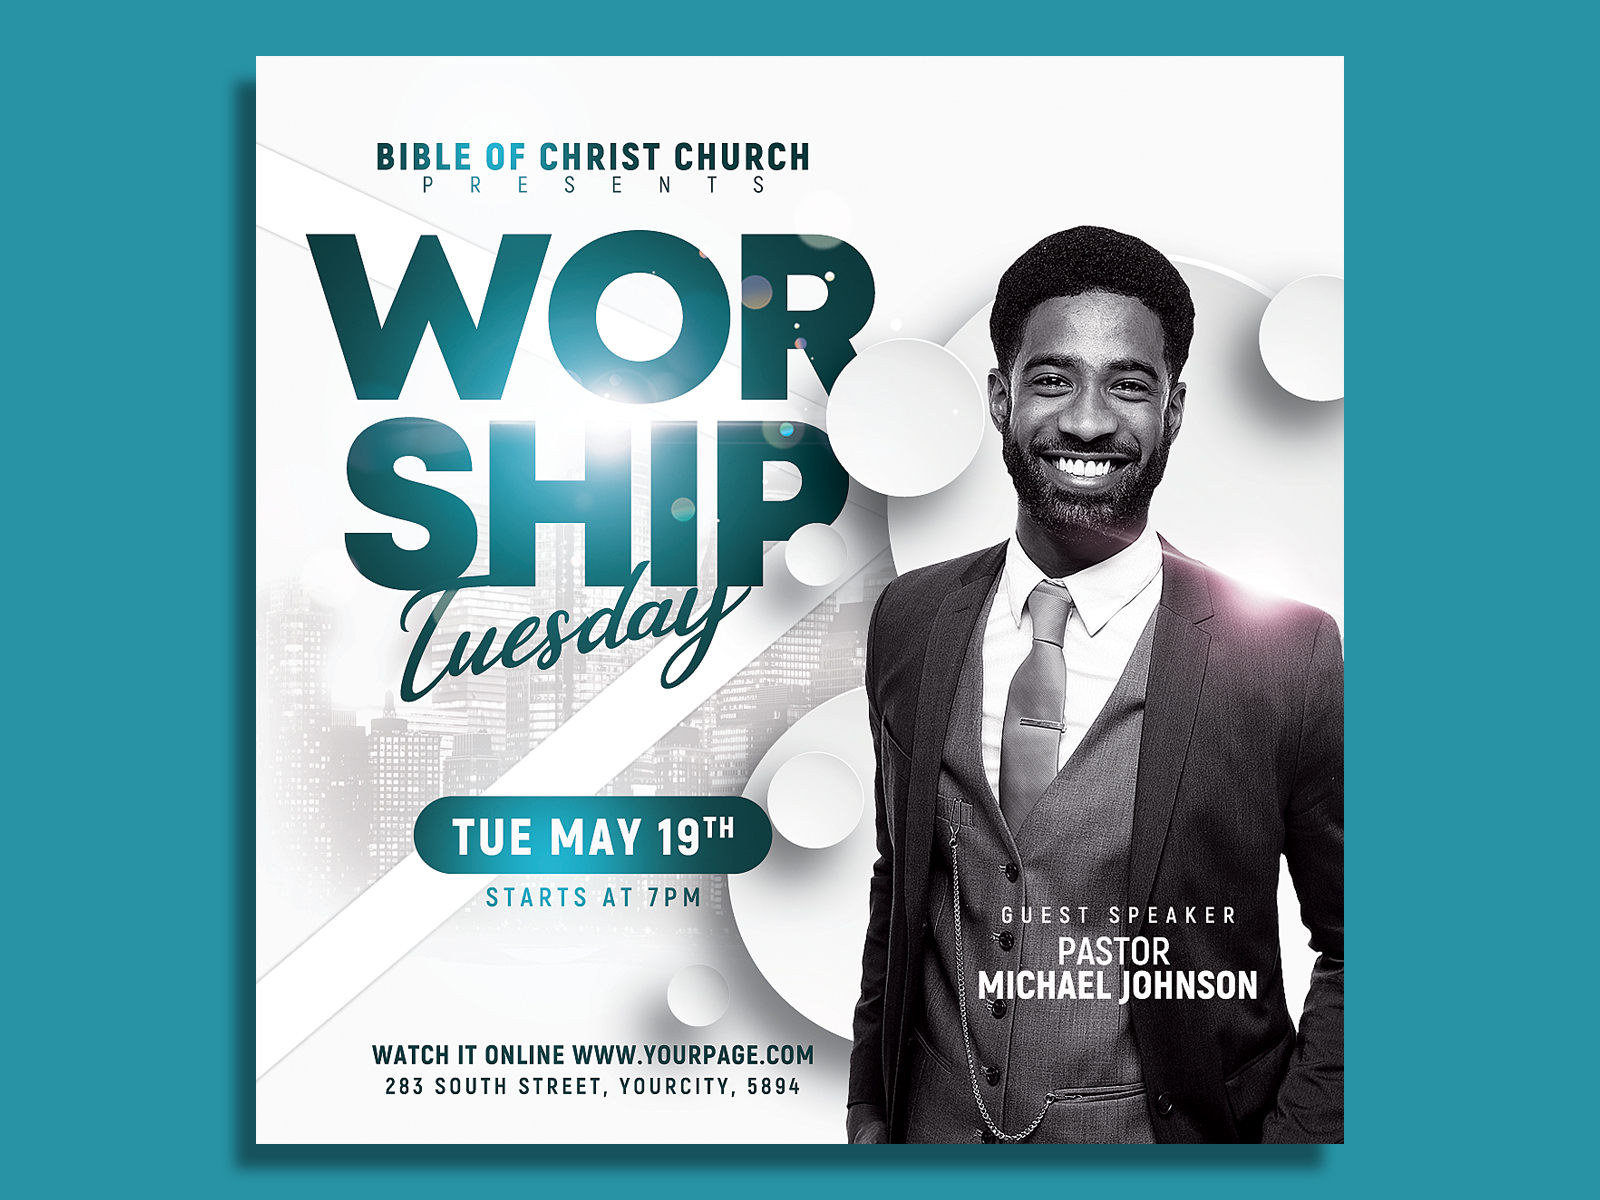 Church Flyer Template by Hotpin on Dribbble